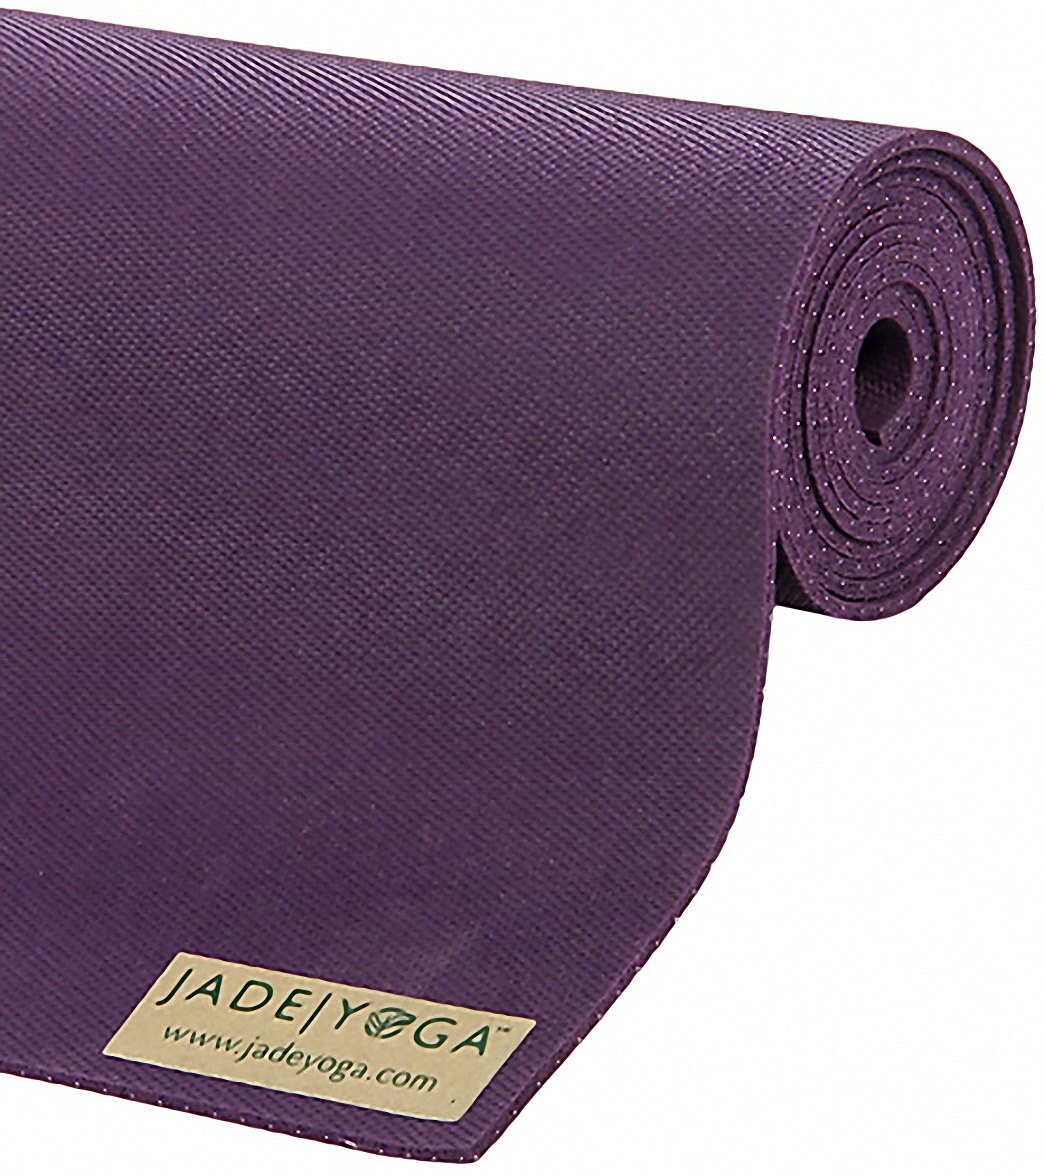 Jade Fusion Yoga Mat for Yoga & Pilates in 74 X 16 Inch Size